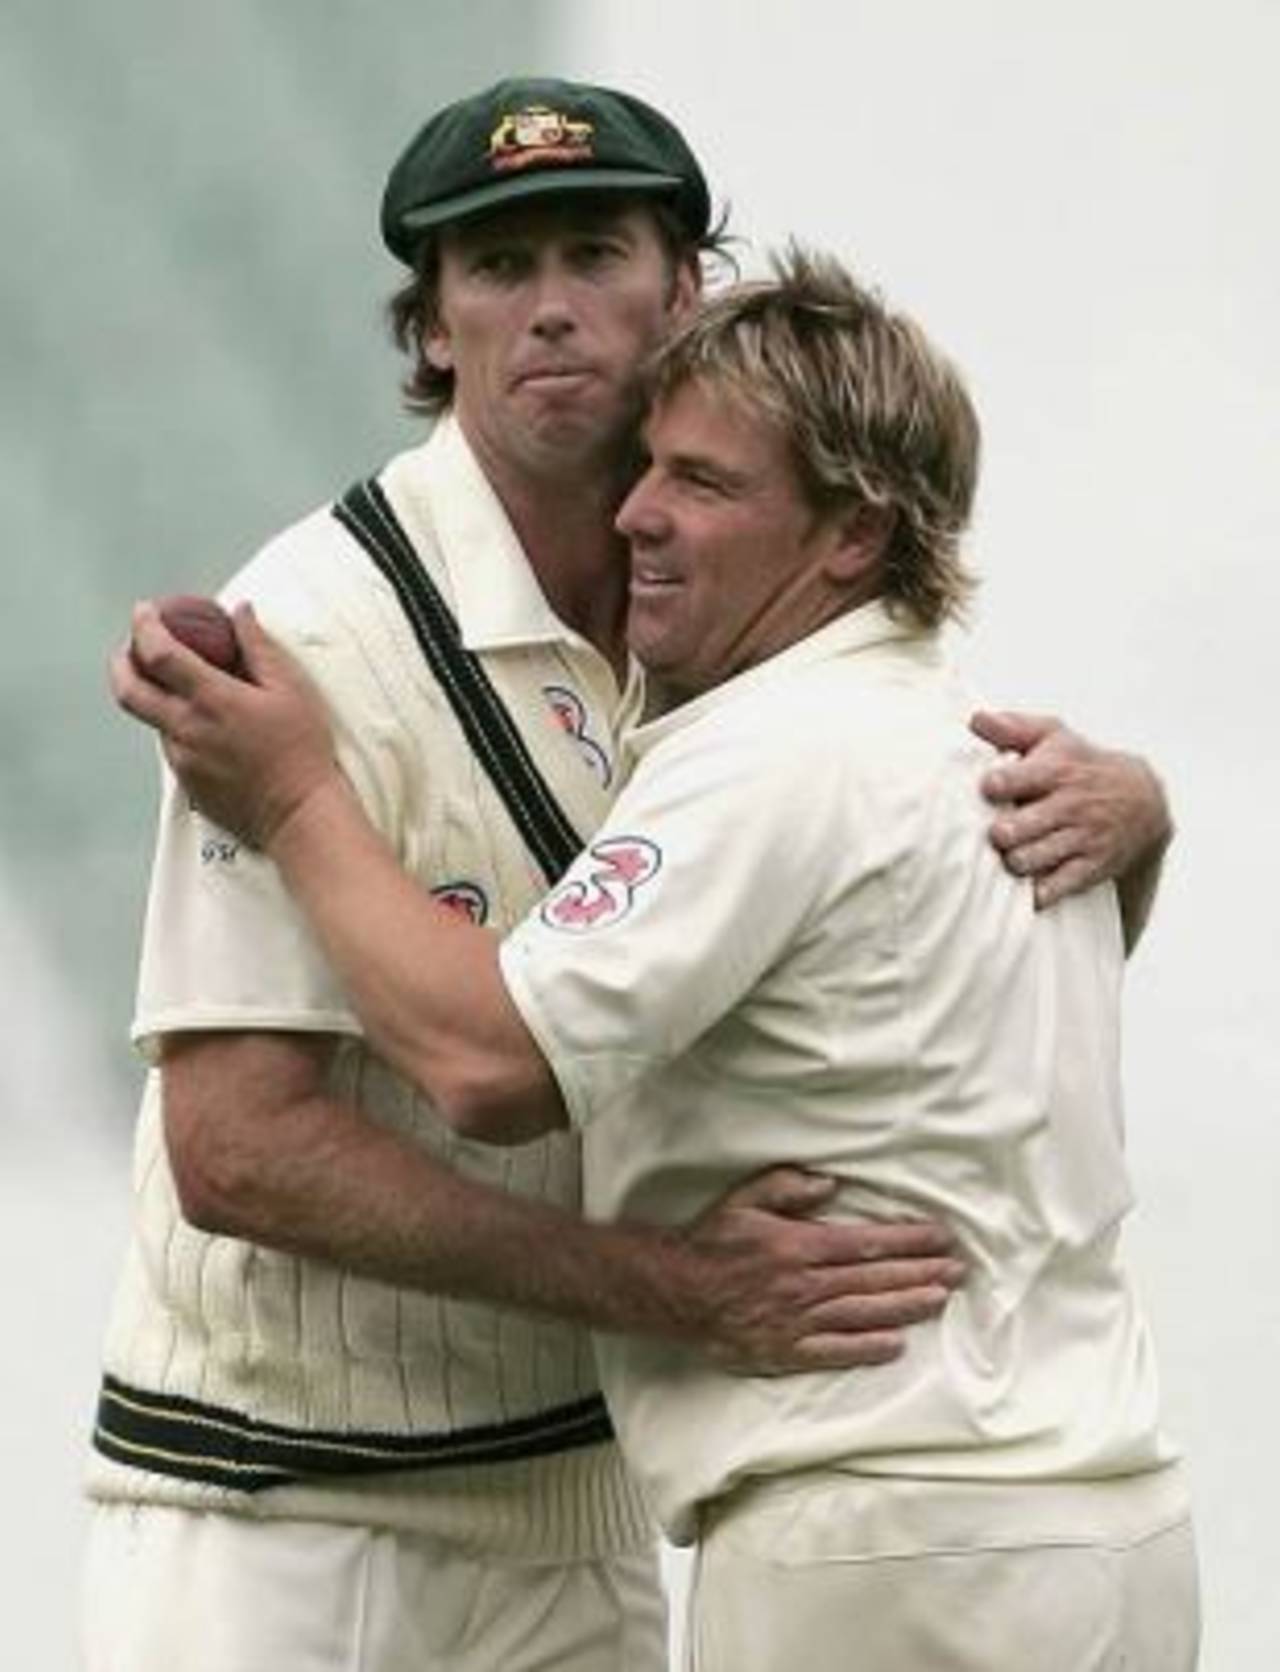 Shane Warne was inducted into the Australian Cricket Hall of Fame last year and will now be joined by Glenn McGrath&nbsp;&nbsp;&bull;&nbsp;&nbsp;Getty Images